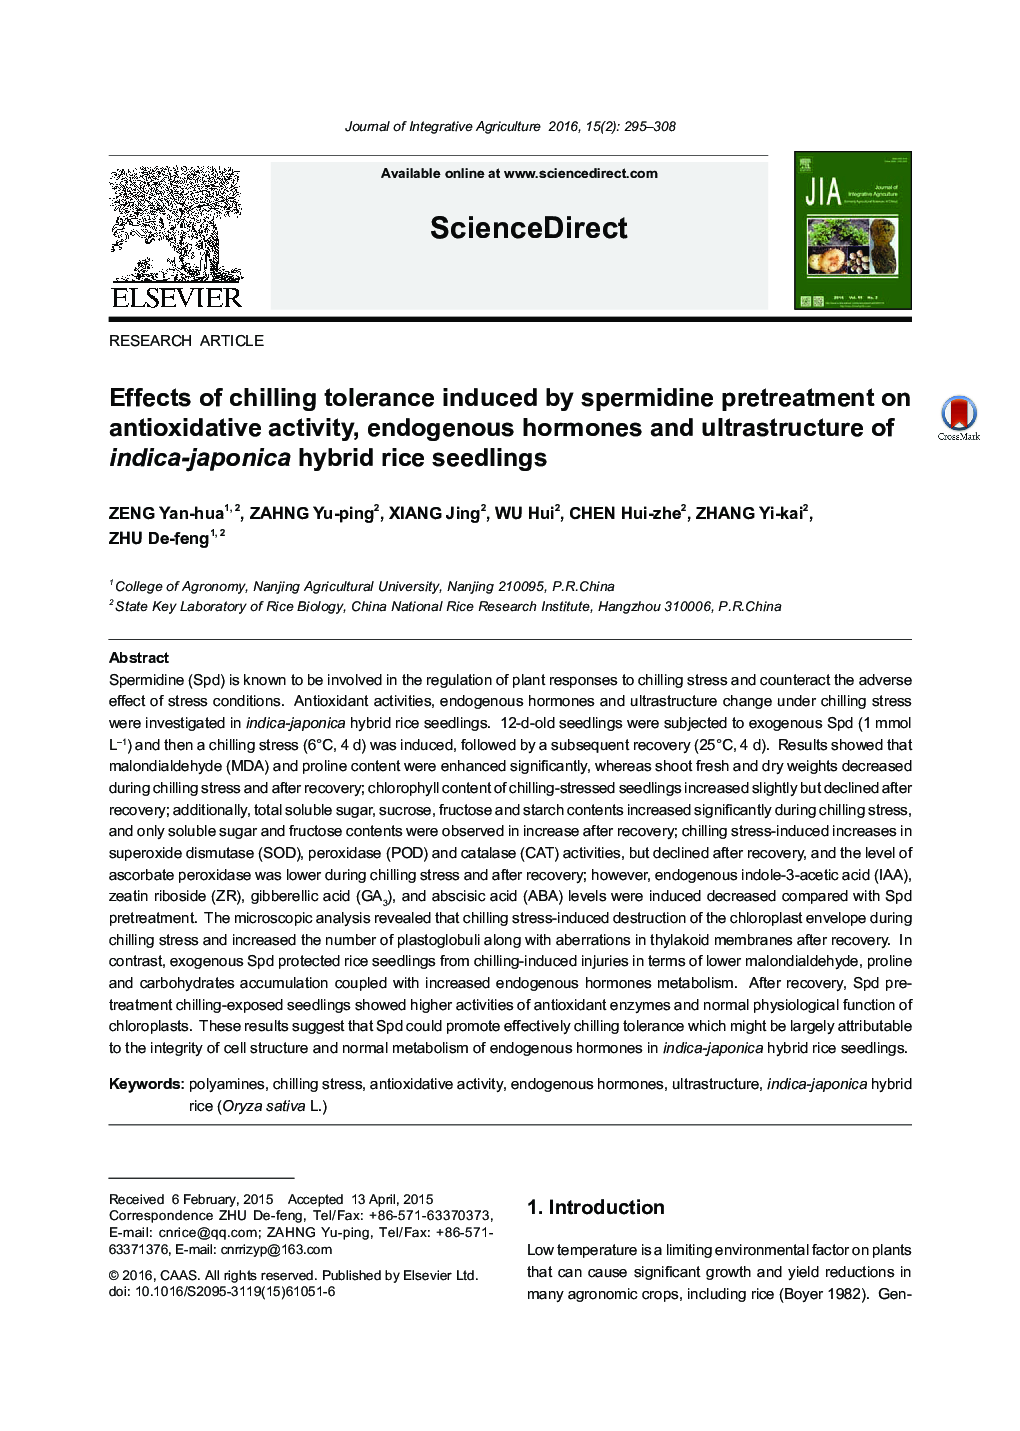 Effects of chilling tolerance induced by spermidine pretreatment on antioxidative activity, endogenous hormones and ultrastructure of indica-japonica hybrid rice seedlings